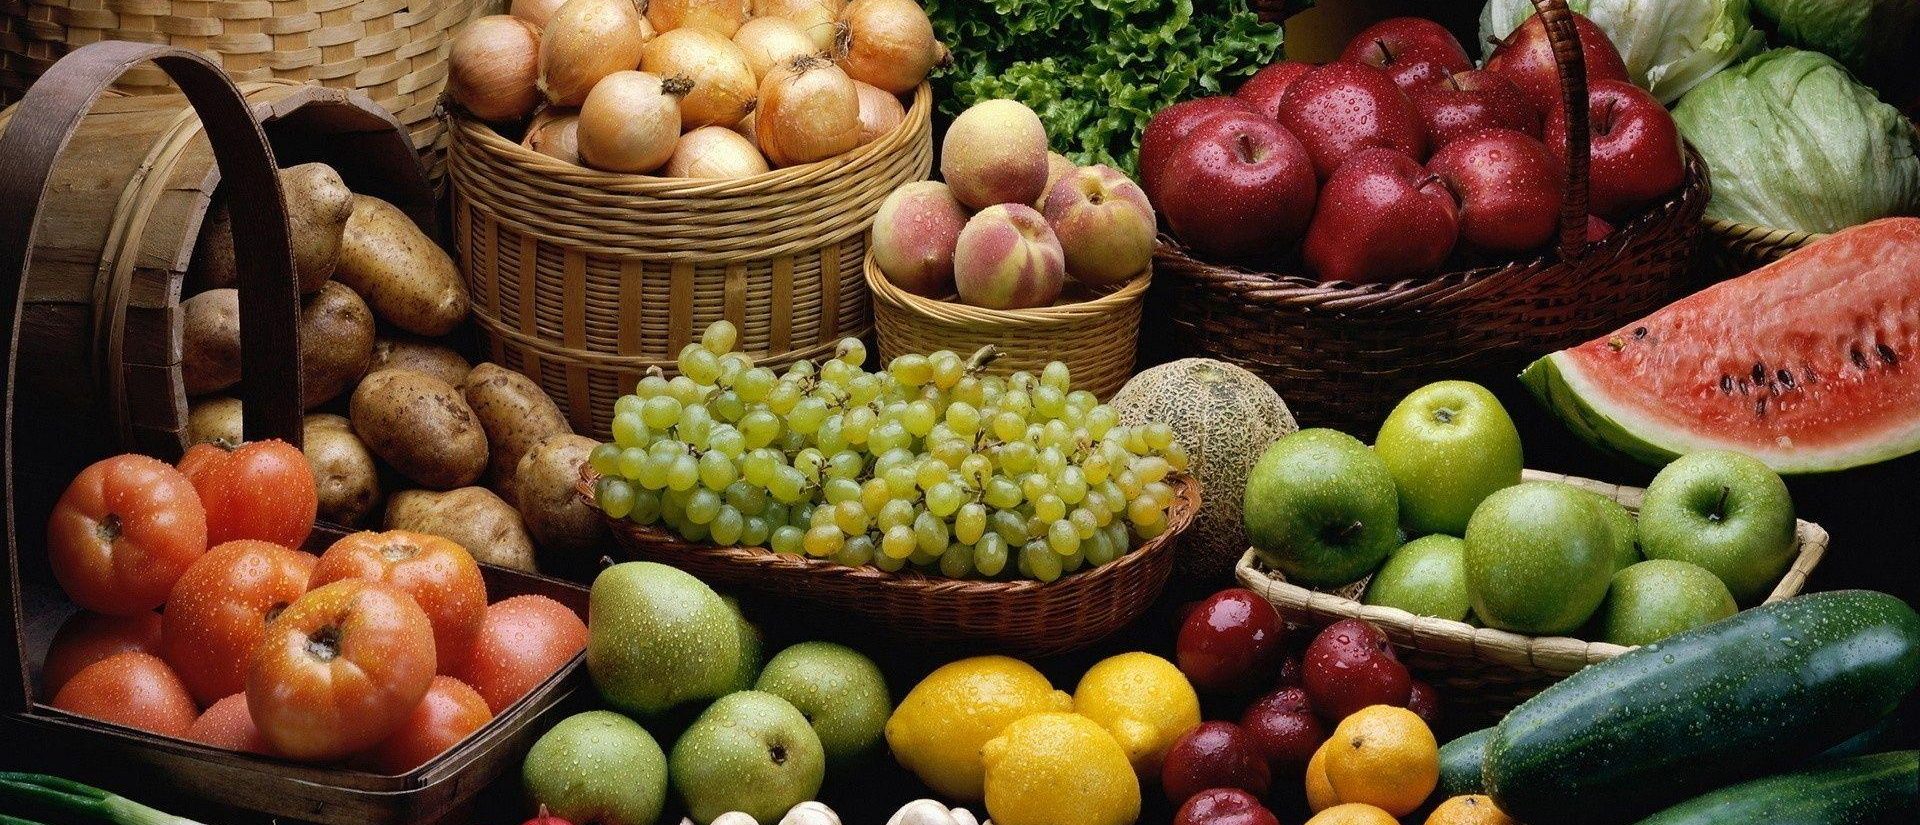 fruits-and-vegetables-1080x1920